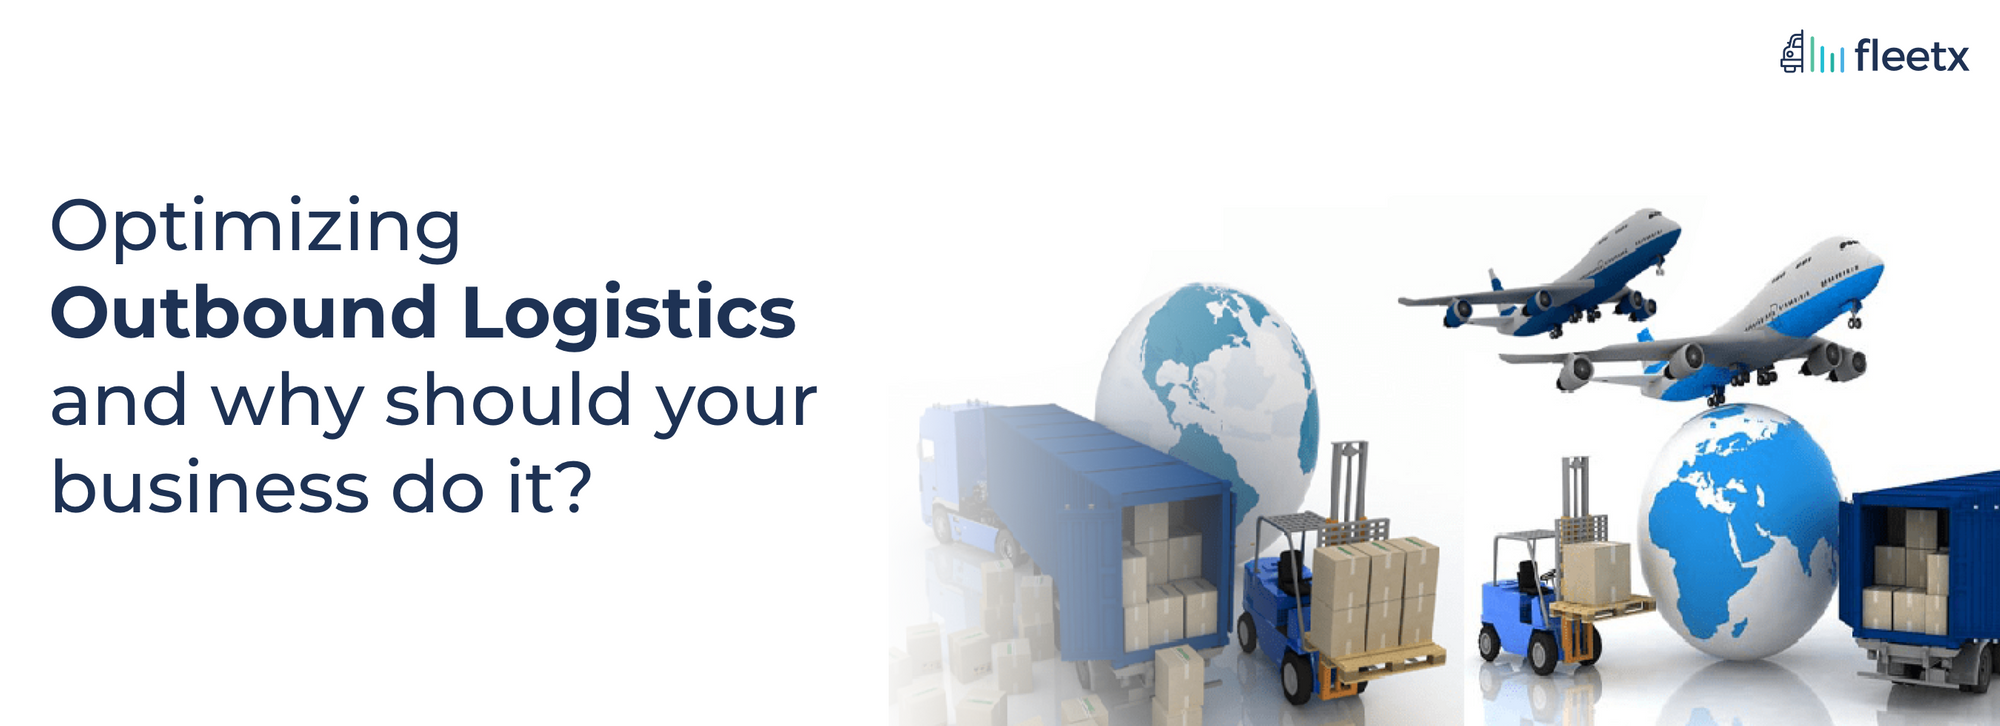 Optimizing Outbound Logistics and why should your business do it?